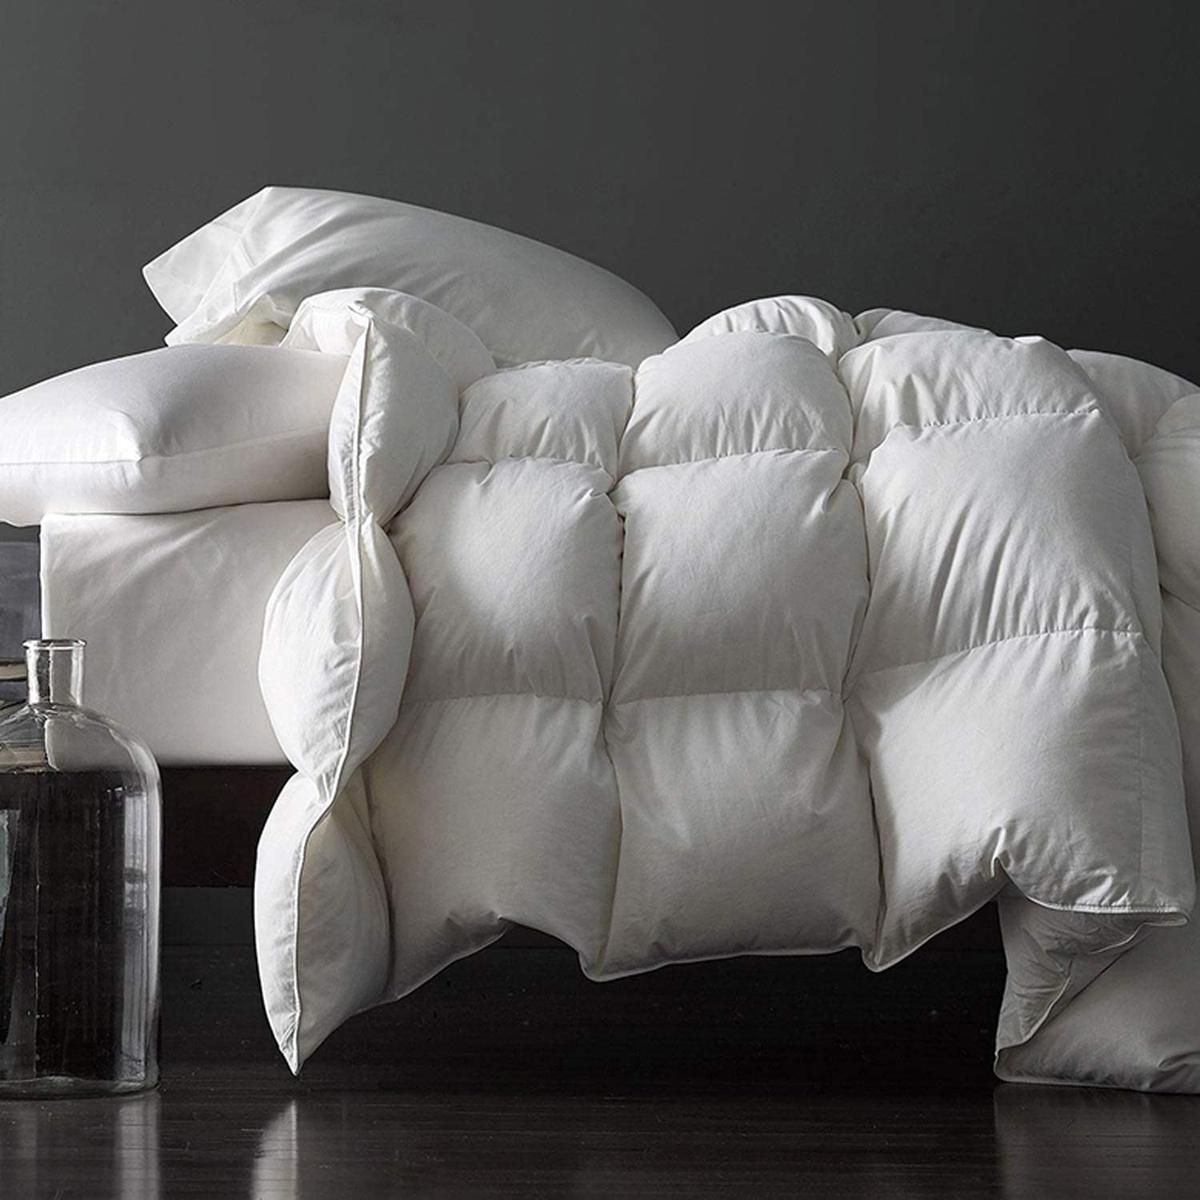 Royoliving Premium Lightweight Silver Down Comforter for $66.49 Shipped